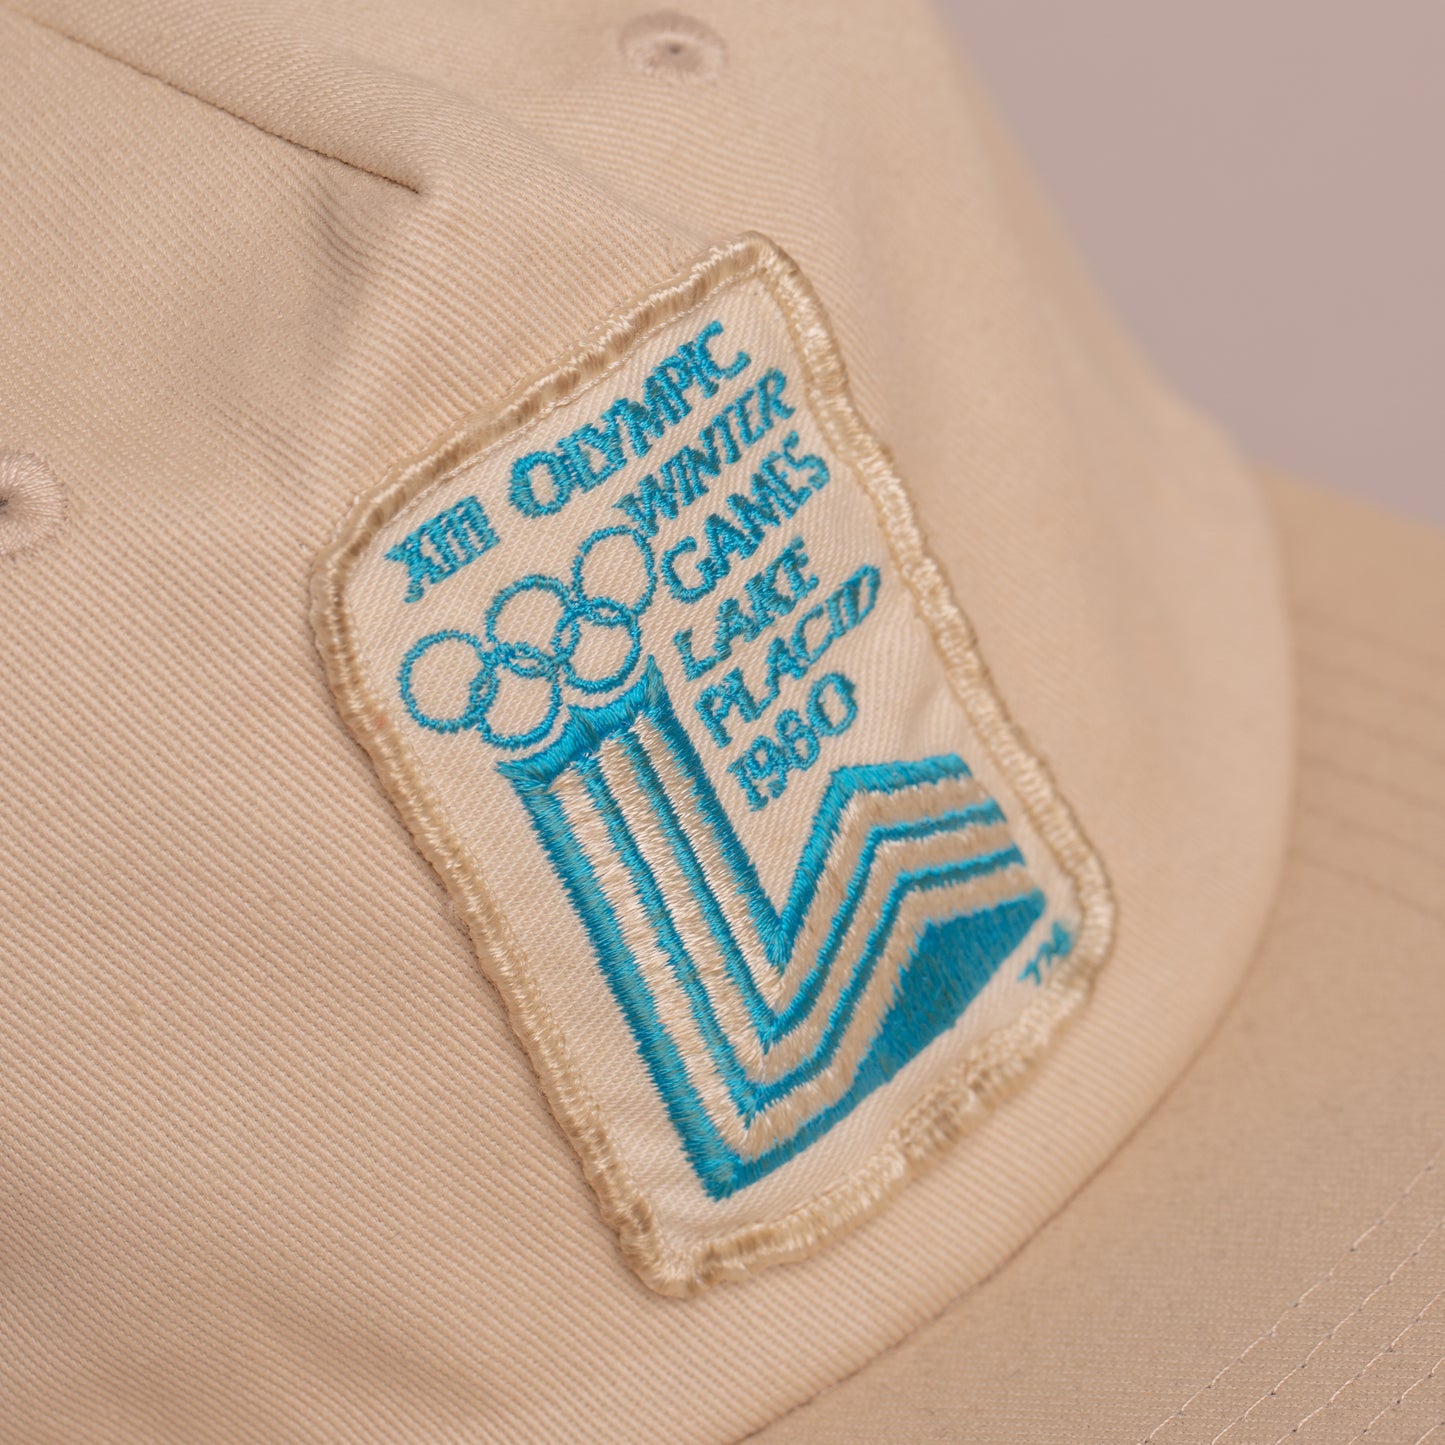 XIII Olympic Winter Games Lake Placid 1980